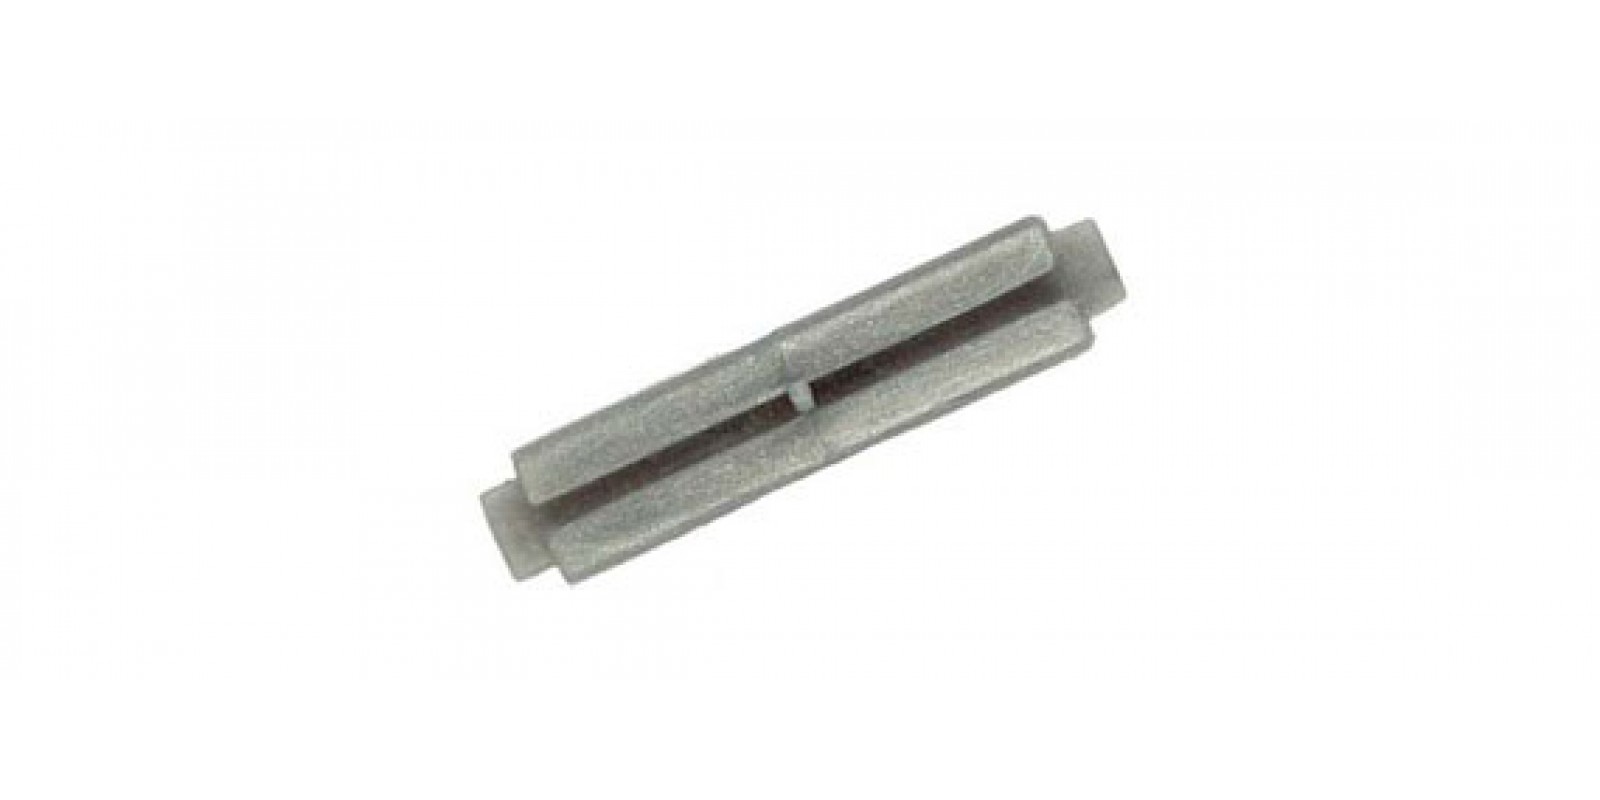 PI55291 insulating rail connector